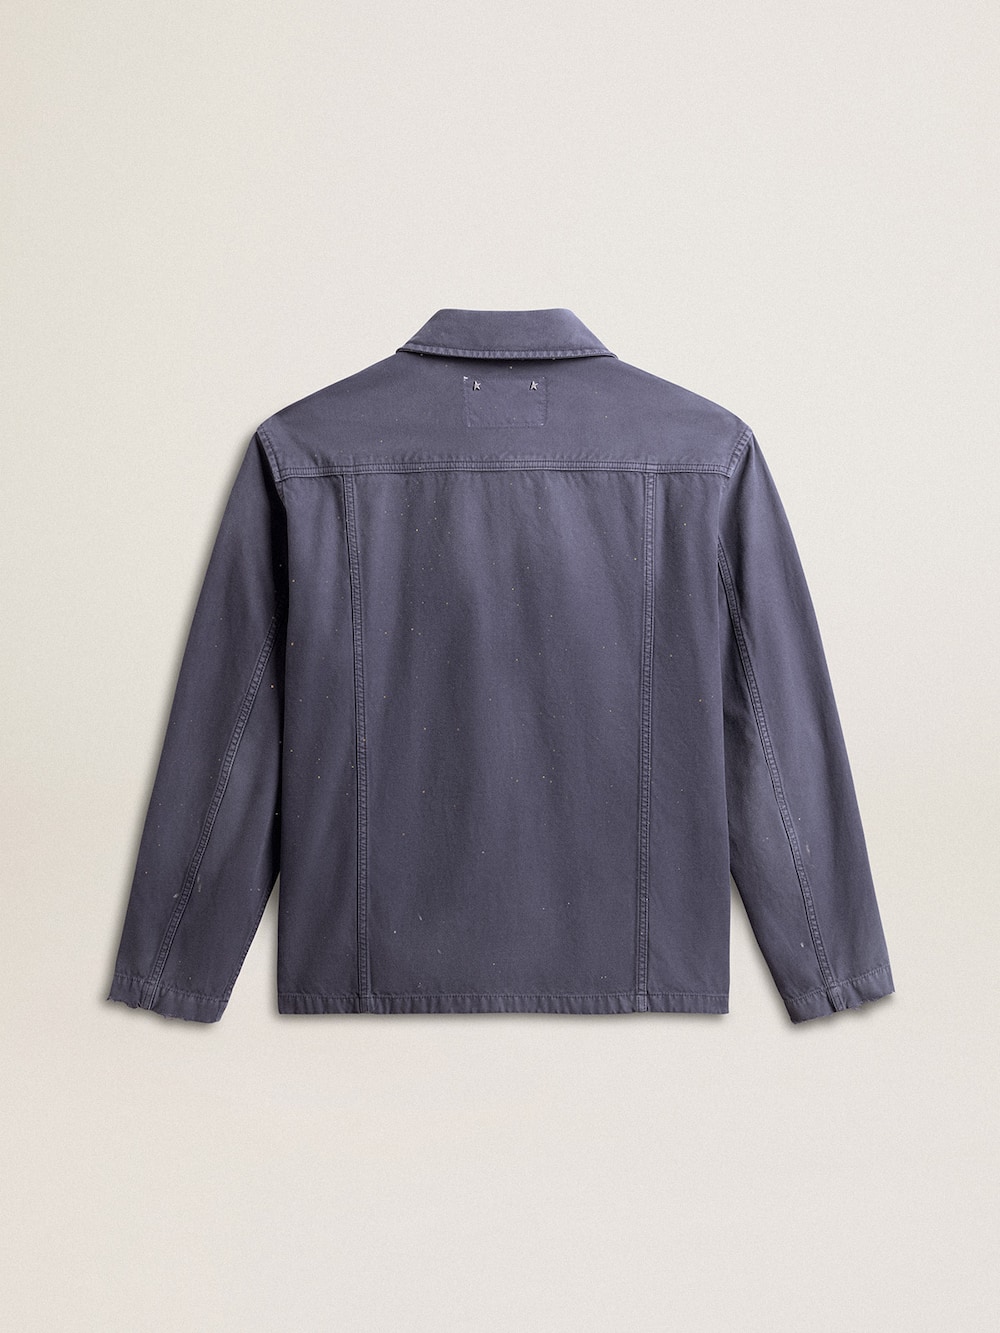 Golden Goose - Men's blue jacket in denim cotton with distressed treatment in 